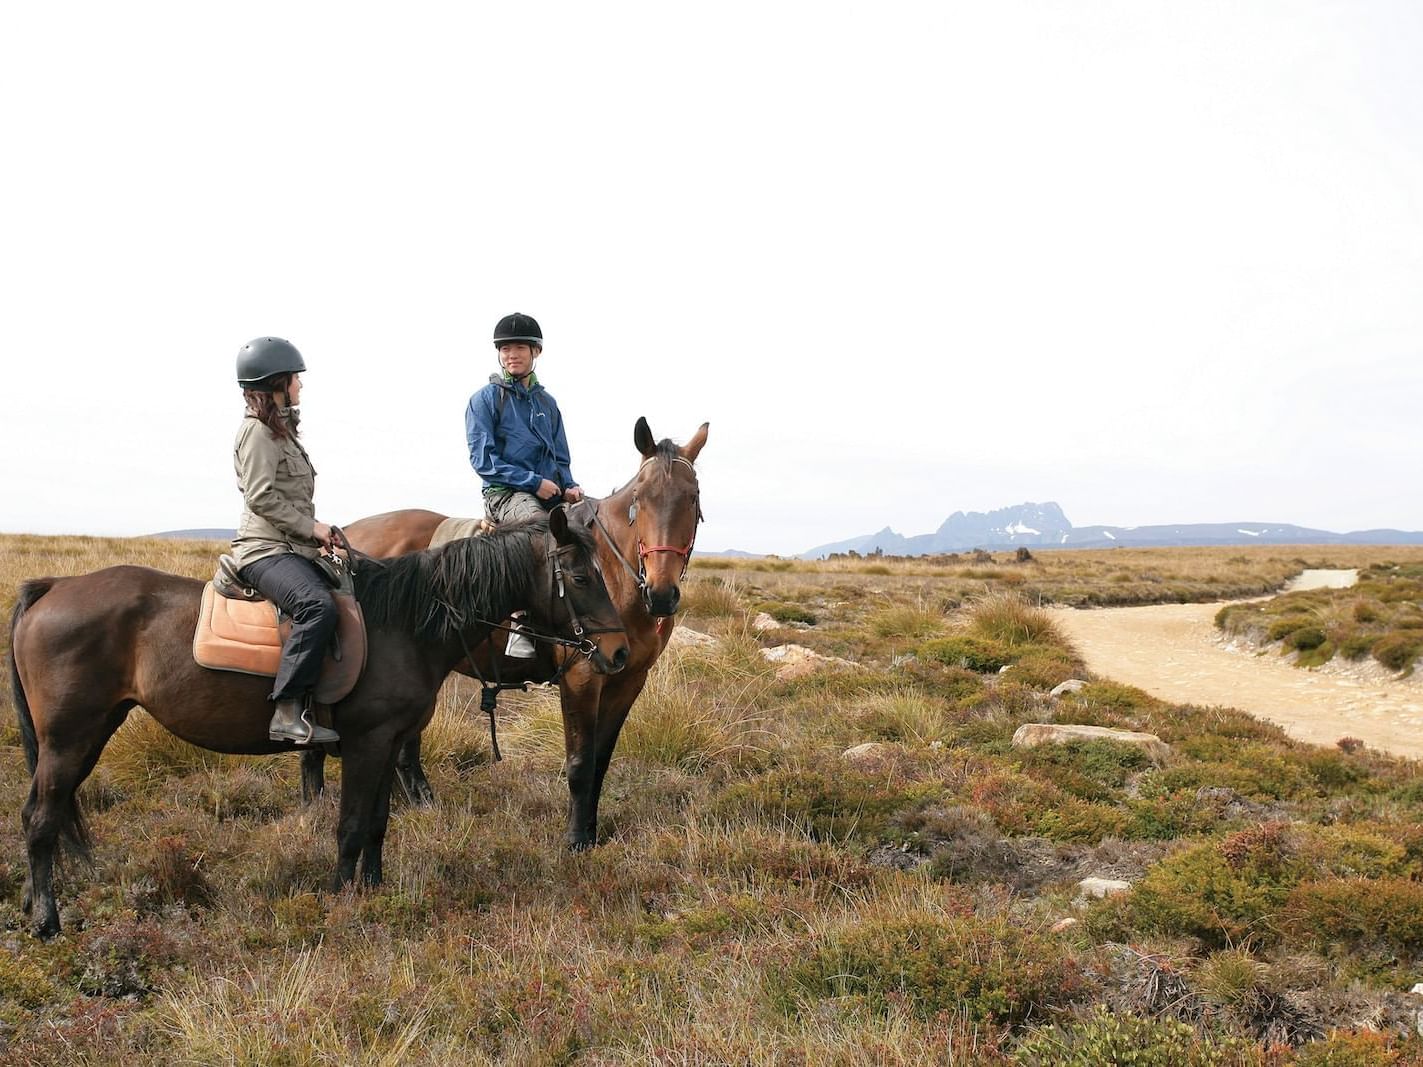 Trail-riding holiday at Cradle Mountain is one of the most amazing wellness retreats in Australia